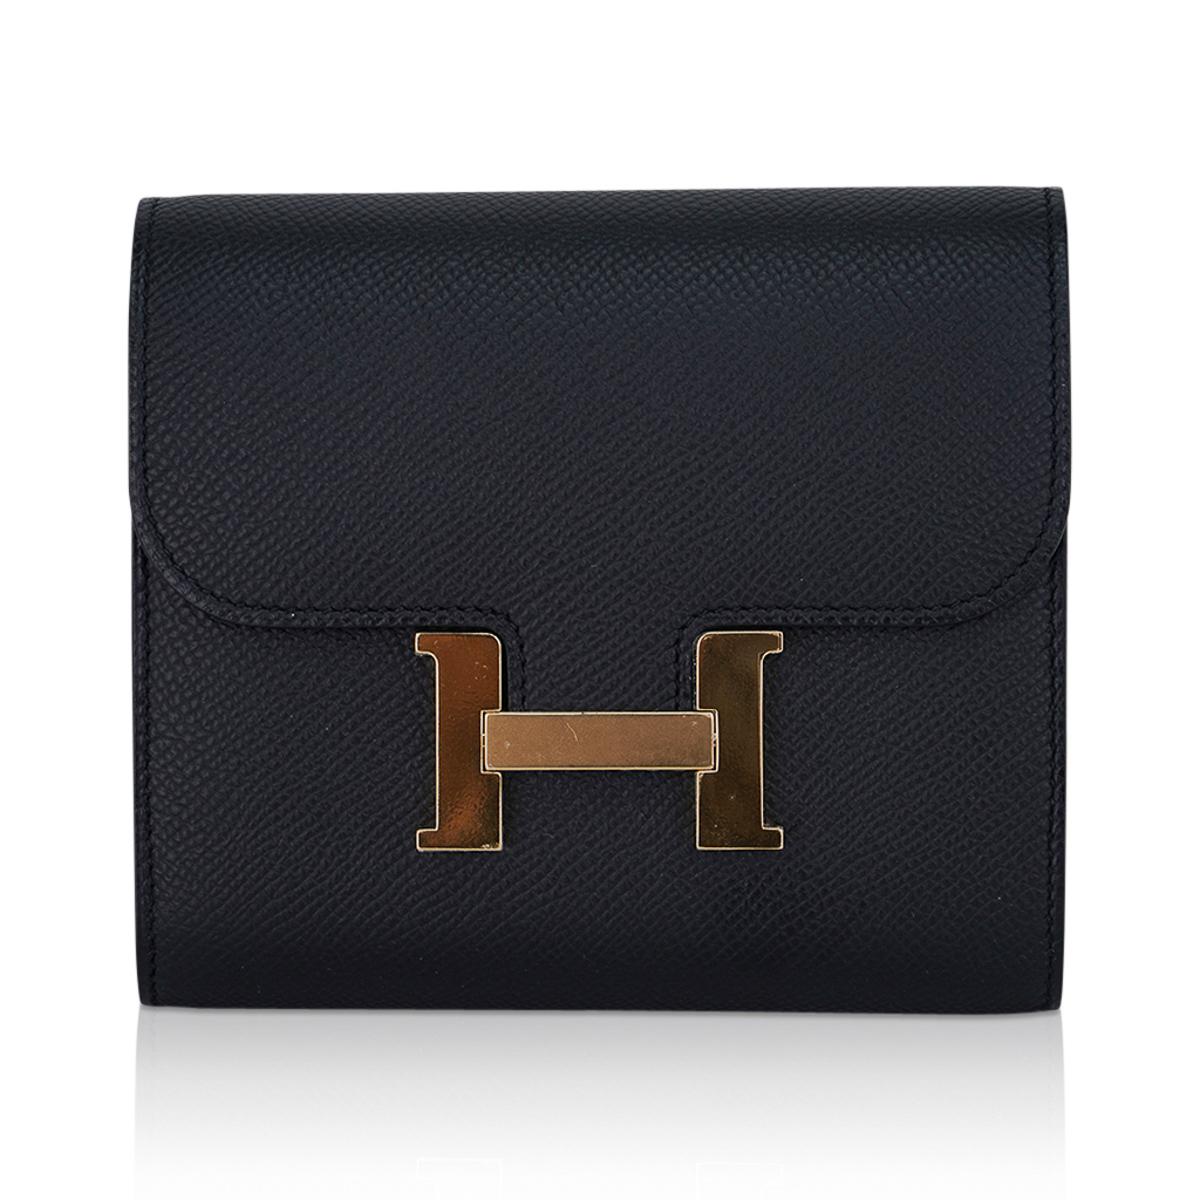 Women's Hermes Constance Compact Wallet Black Epsom Leather Gold Hardware